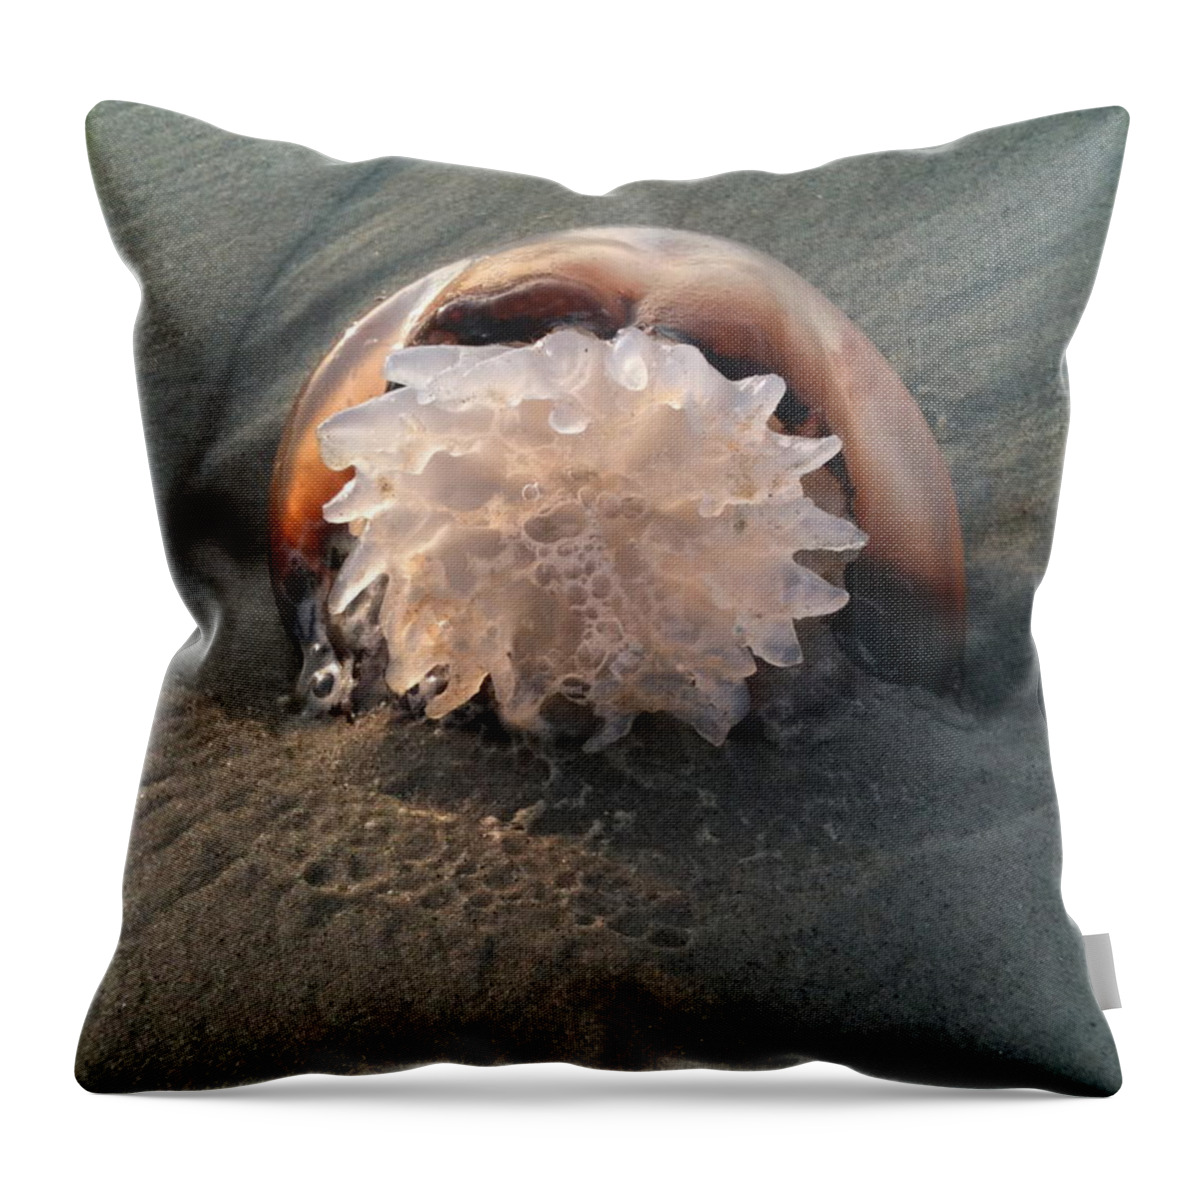 Shells Throw Pillow featuring the photograph Washed Up by M West